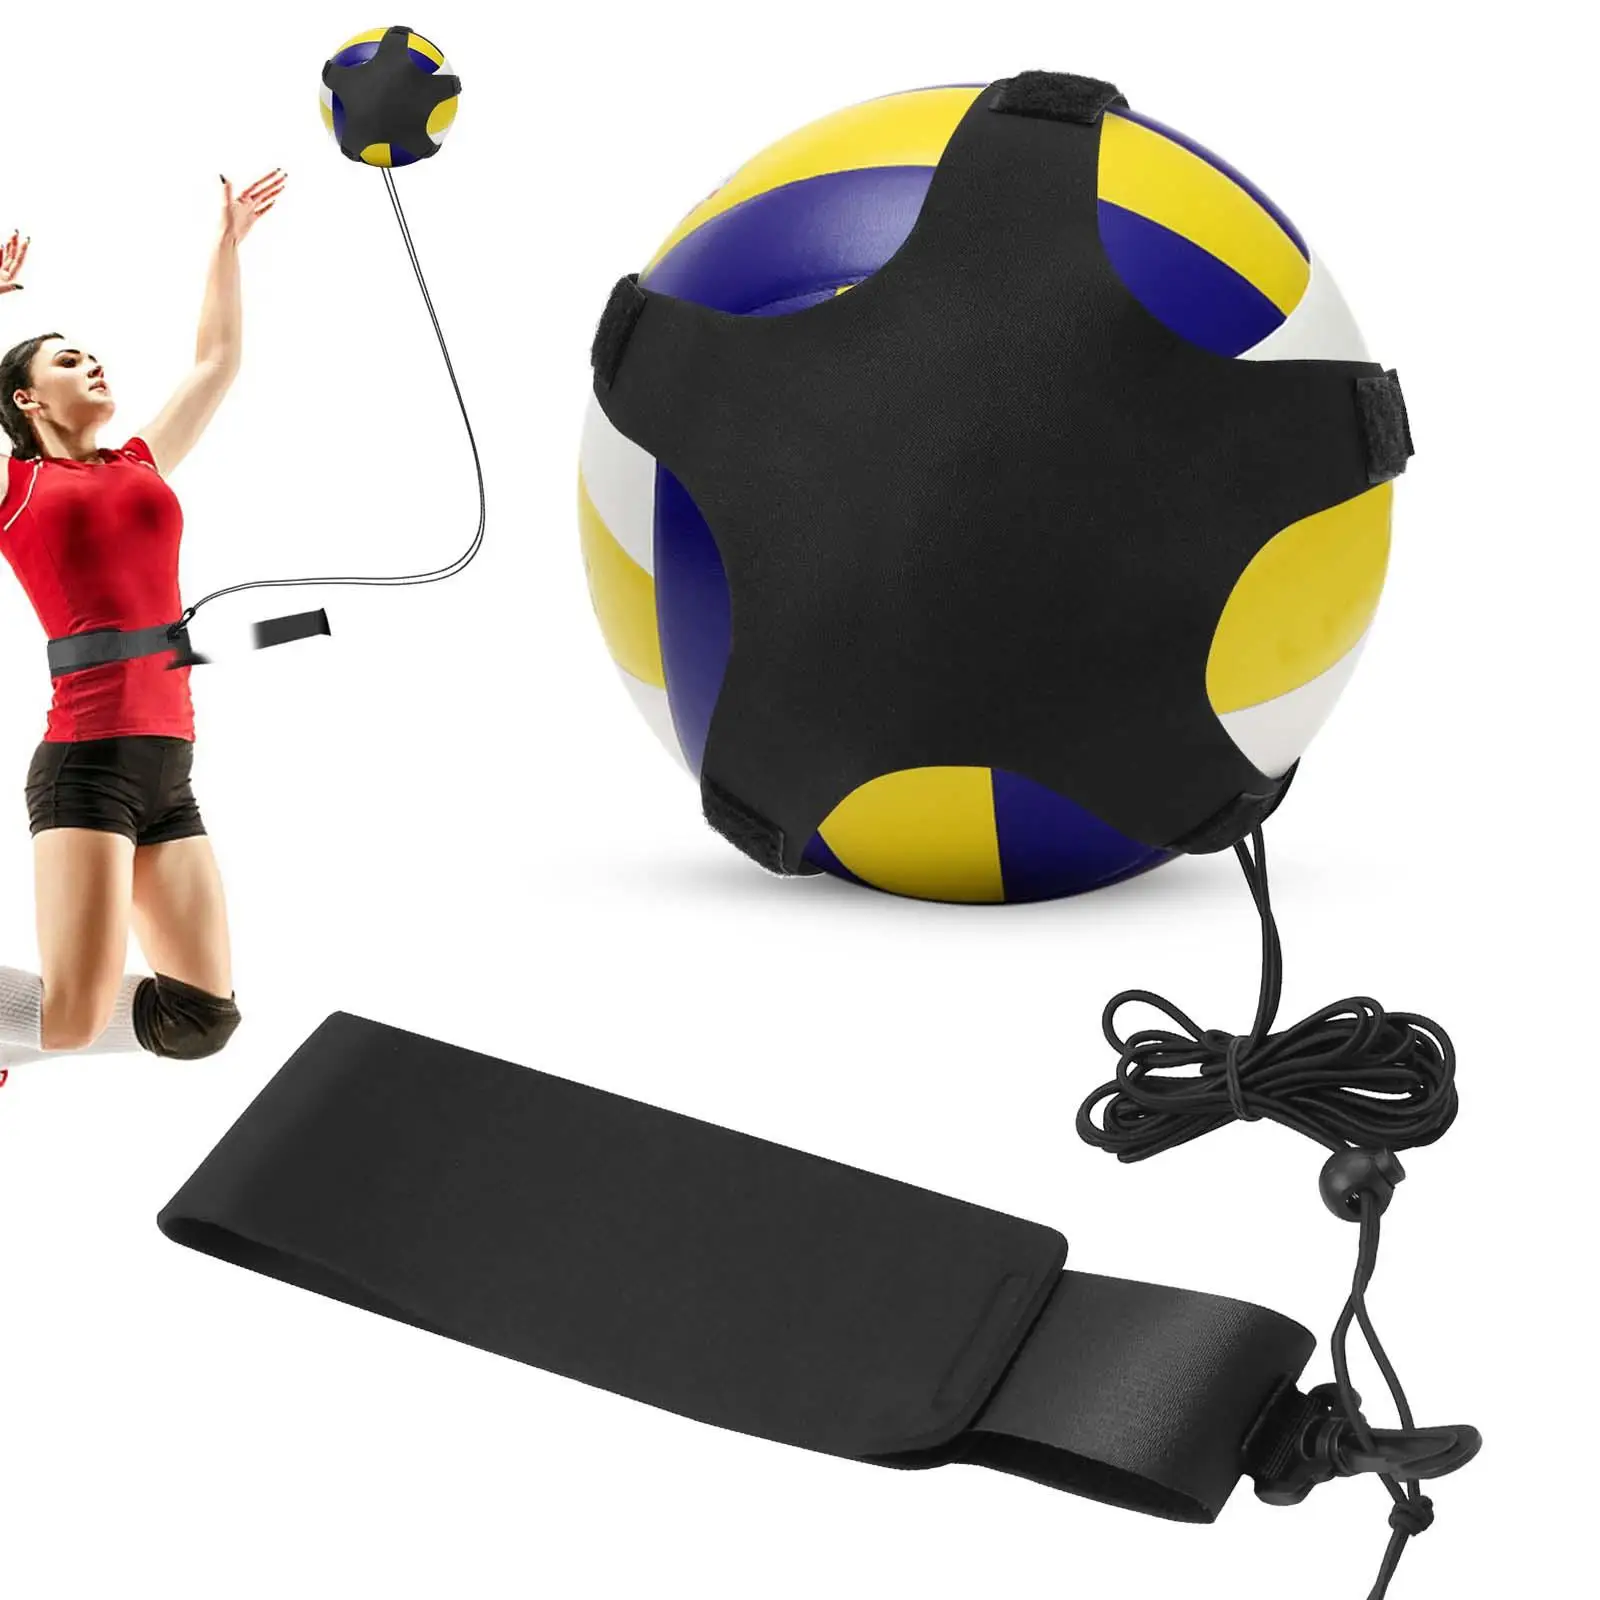 

Volleyball Training Equipment Aid Volleyball Gifts Elastic Cord Adjustable Solo Serve & Spike Trainer for Beginners Arm Swing